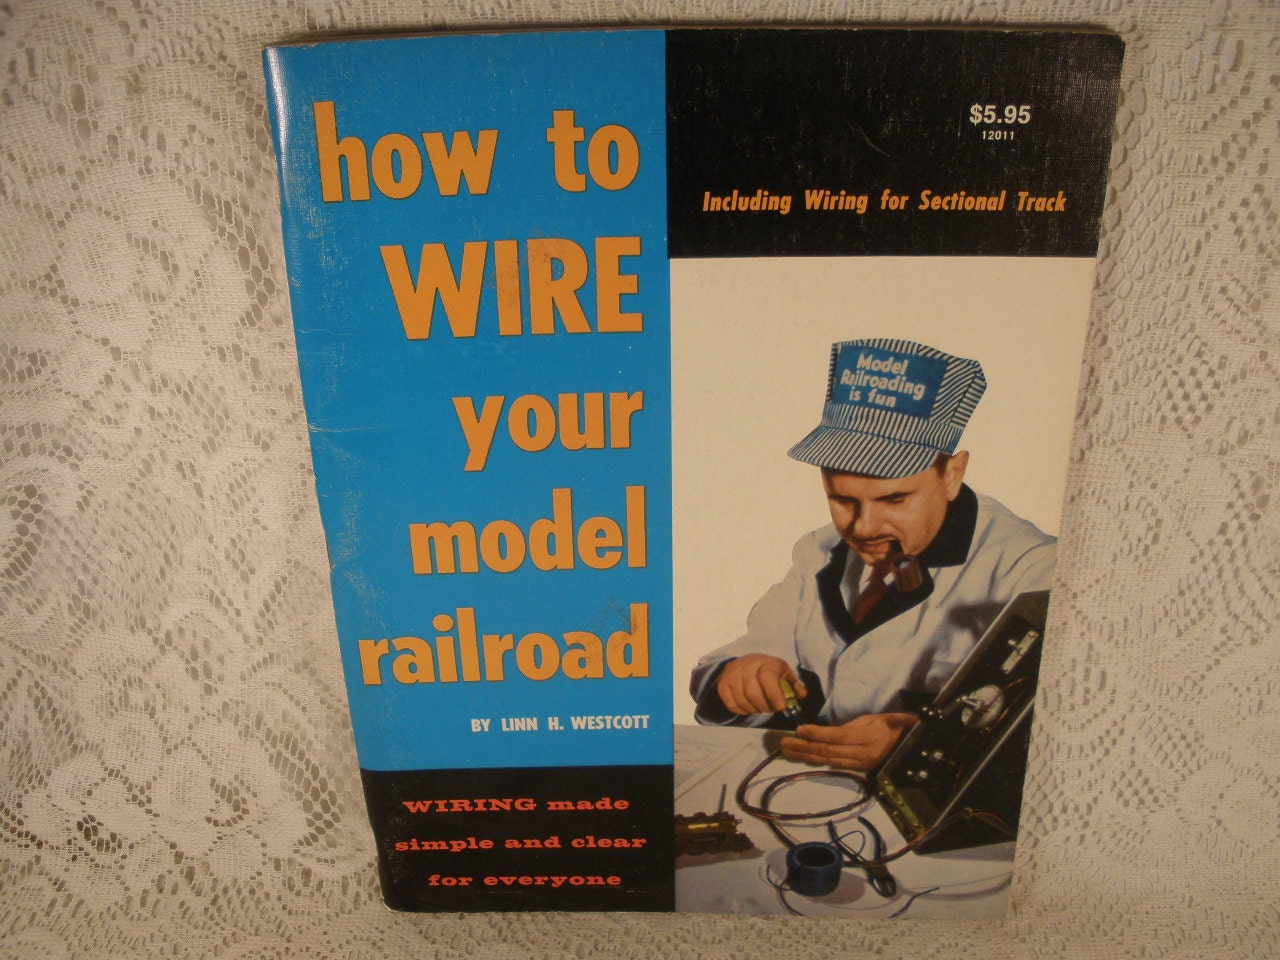 HOW TO WIRE YOUR MODEL RAILROAD: Wiring Made Simple and Clear for Everyone Linn H. WESTCOTT